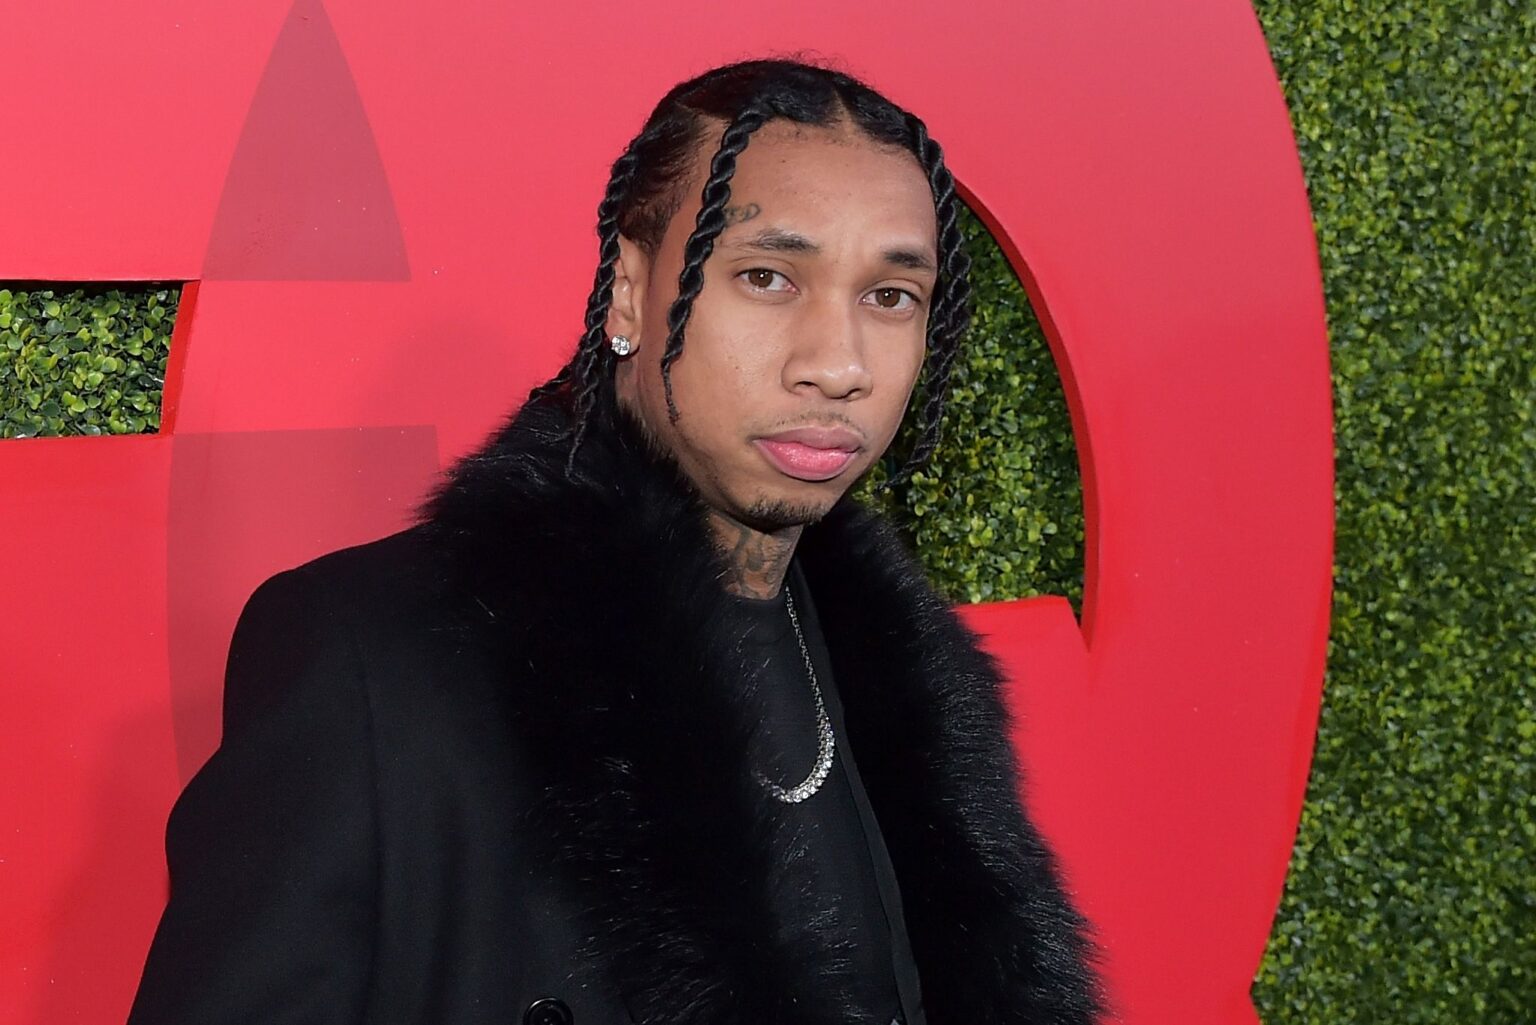 Tyga King! Why we support Tyga along with Twitter during these challenging times. Just what did Nikita Dragun do to the rapper?